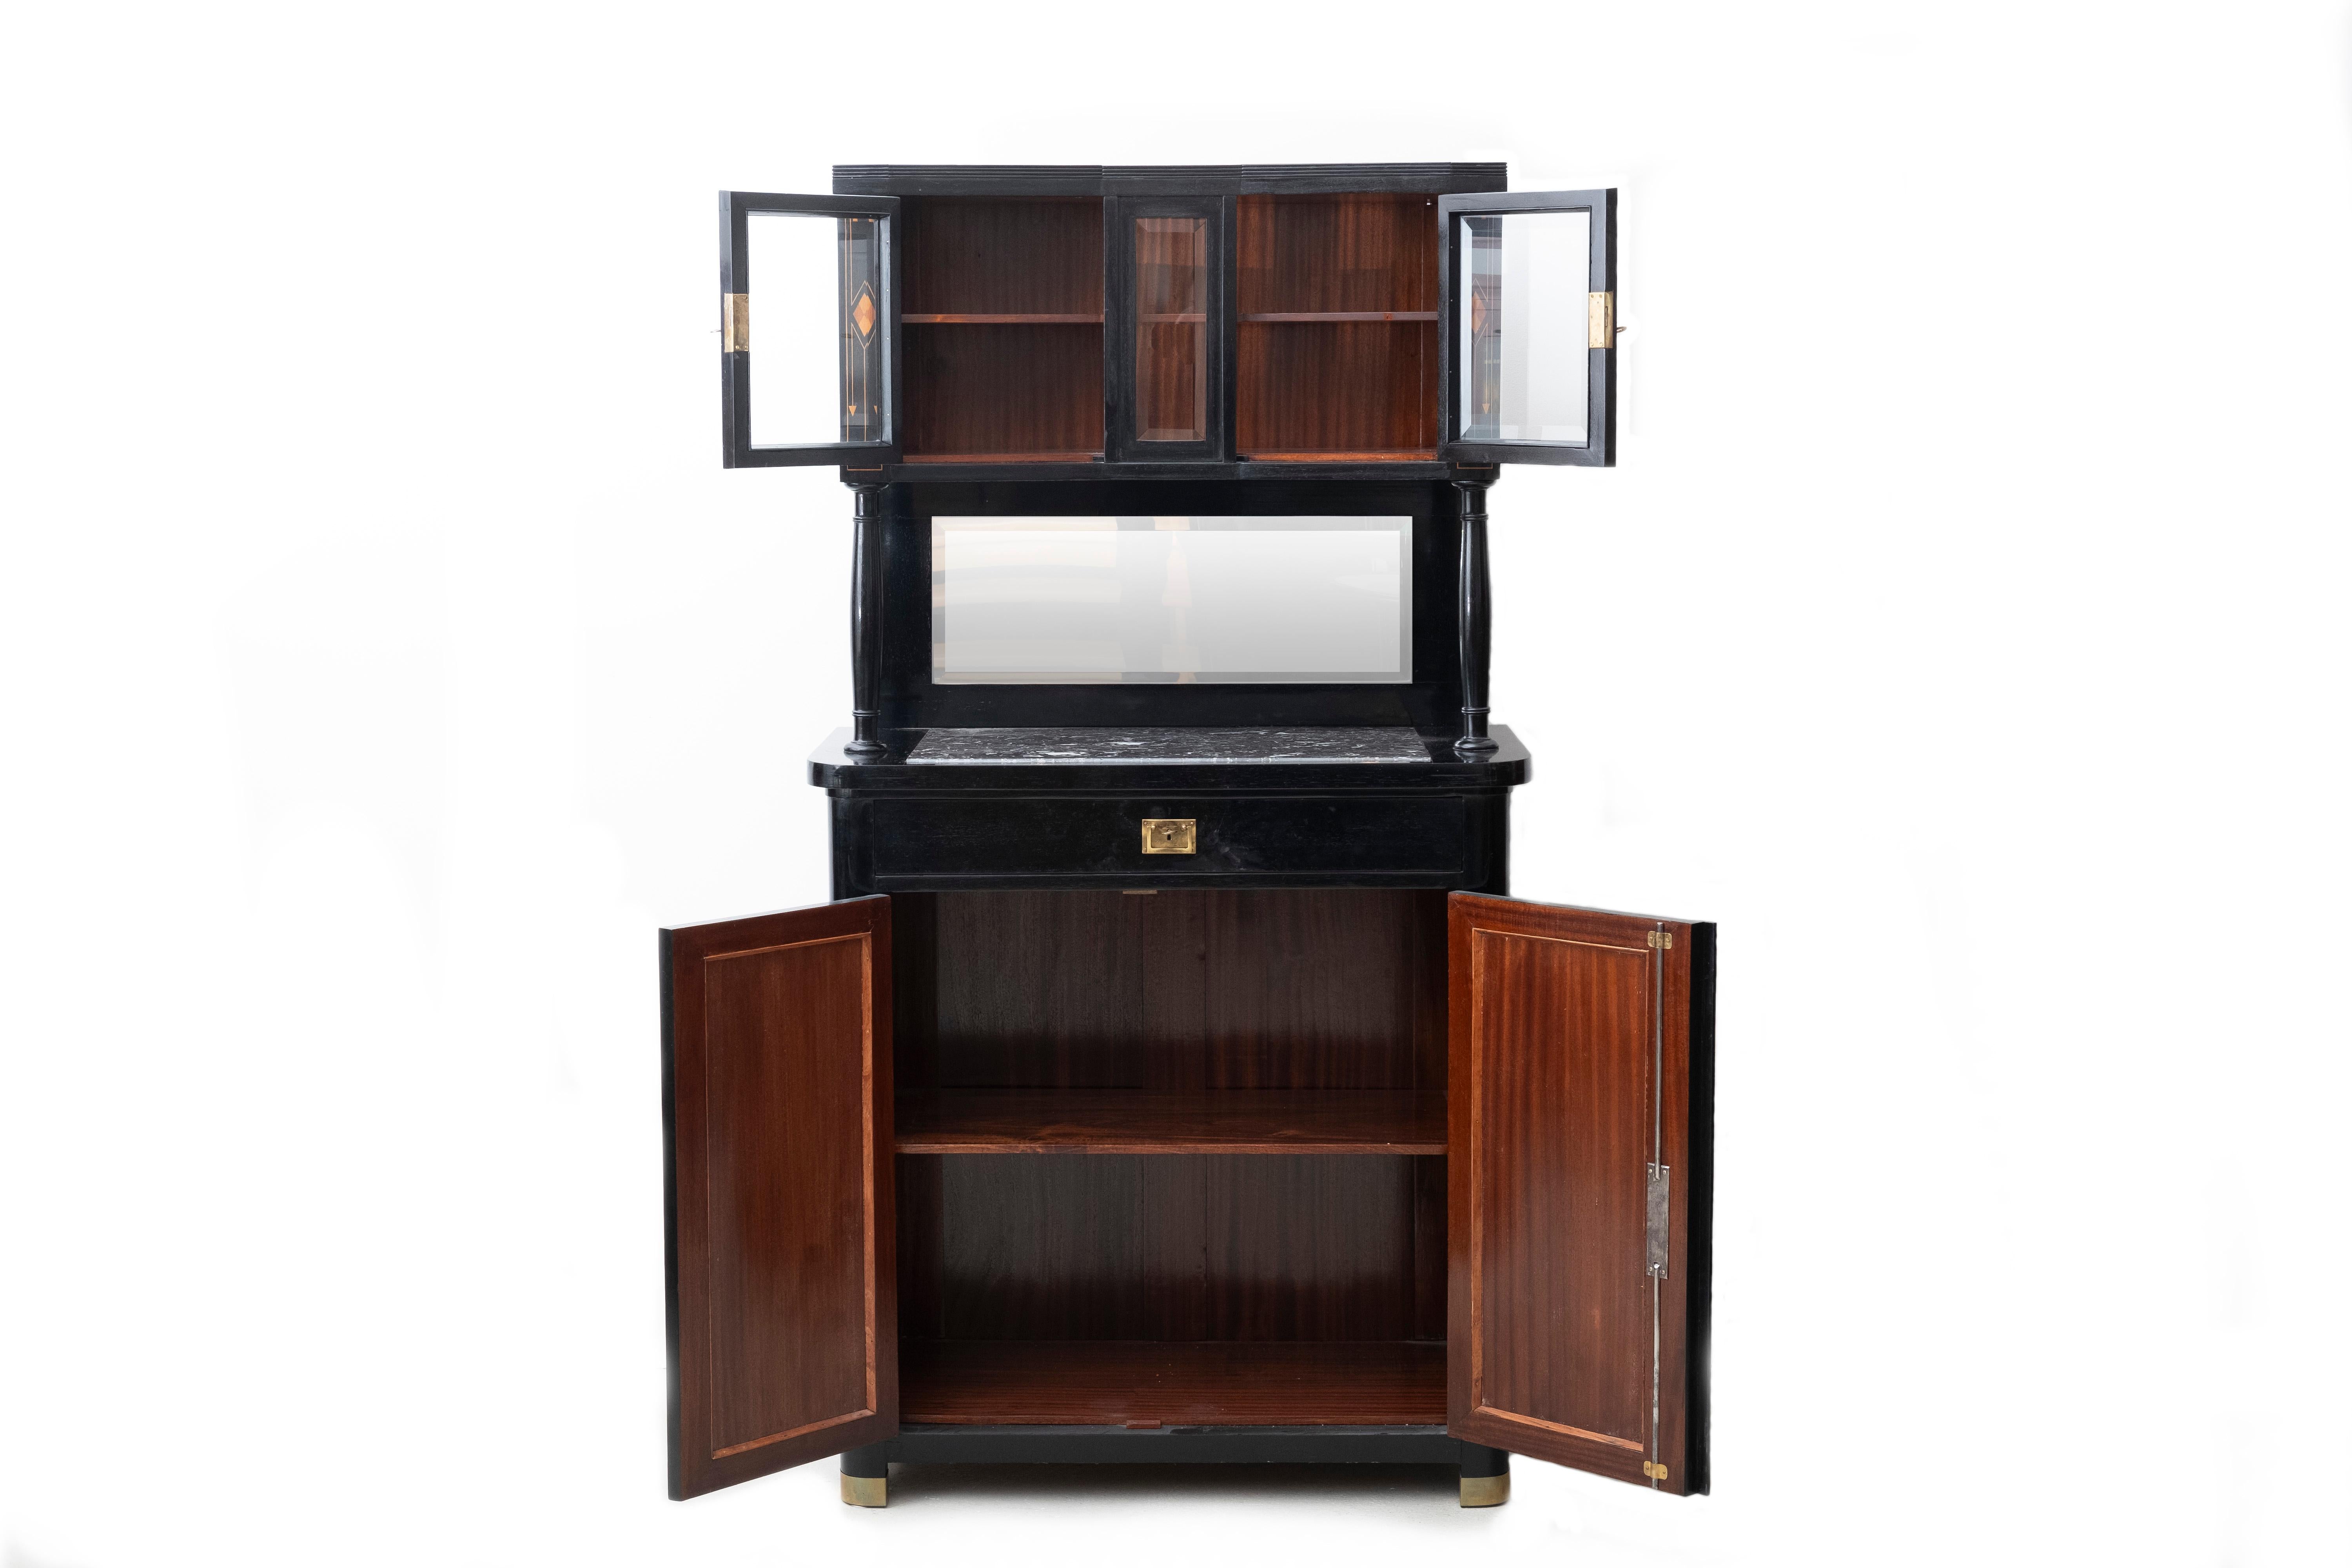 Secessionist Cabinet / Buffet
Vienna, Austria, circa 1900
This cabinet features:
- wooden intarsia (fruit wood)
- a rectangular inlayed marble plate and a vertically placed mirror with facetted corners
- polished brass fittings key hole fittings and